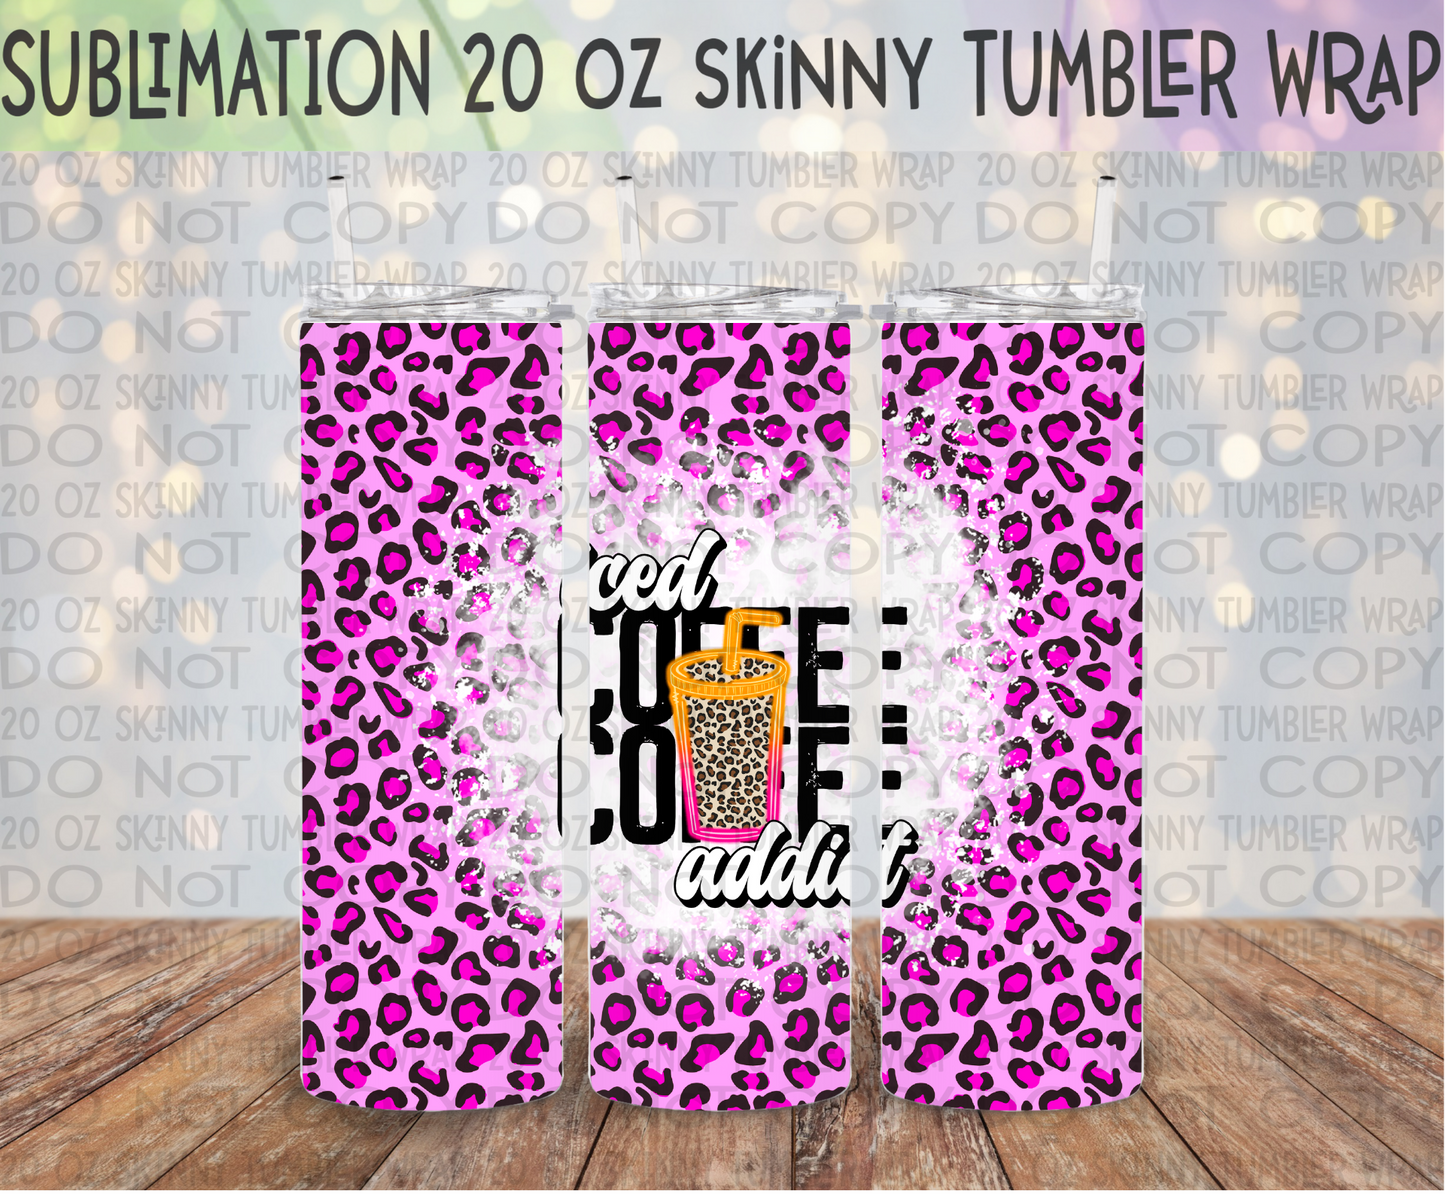 Iced Coffee Addict -Leopard Pink 20 Oz Skinny Tumbler Wrap - Sublimation Transfer - RTS